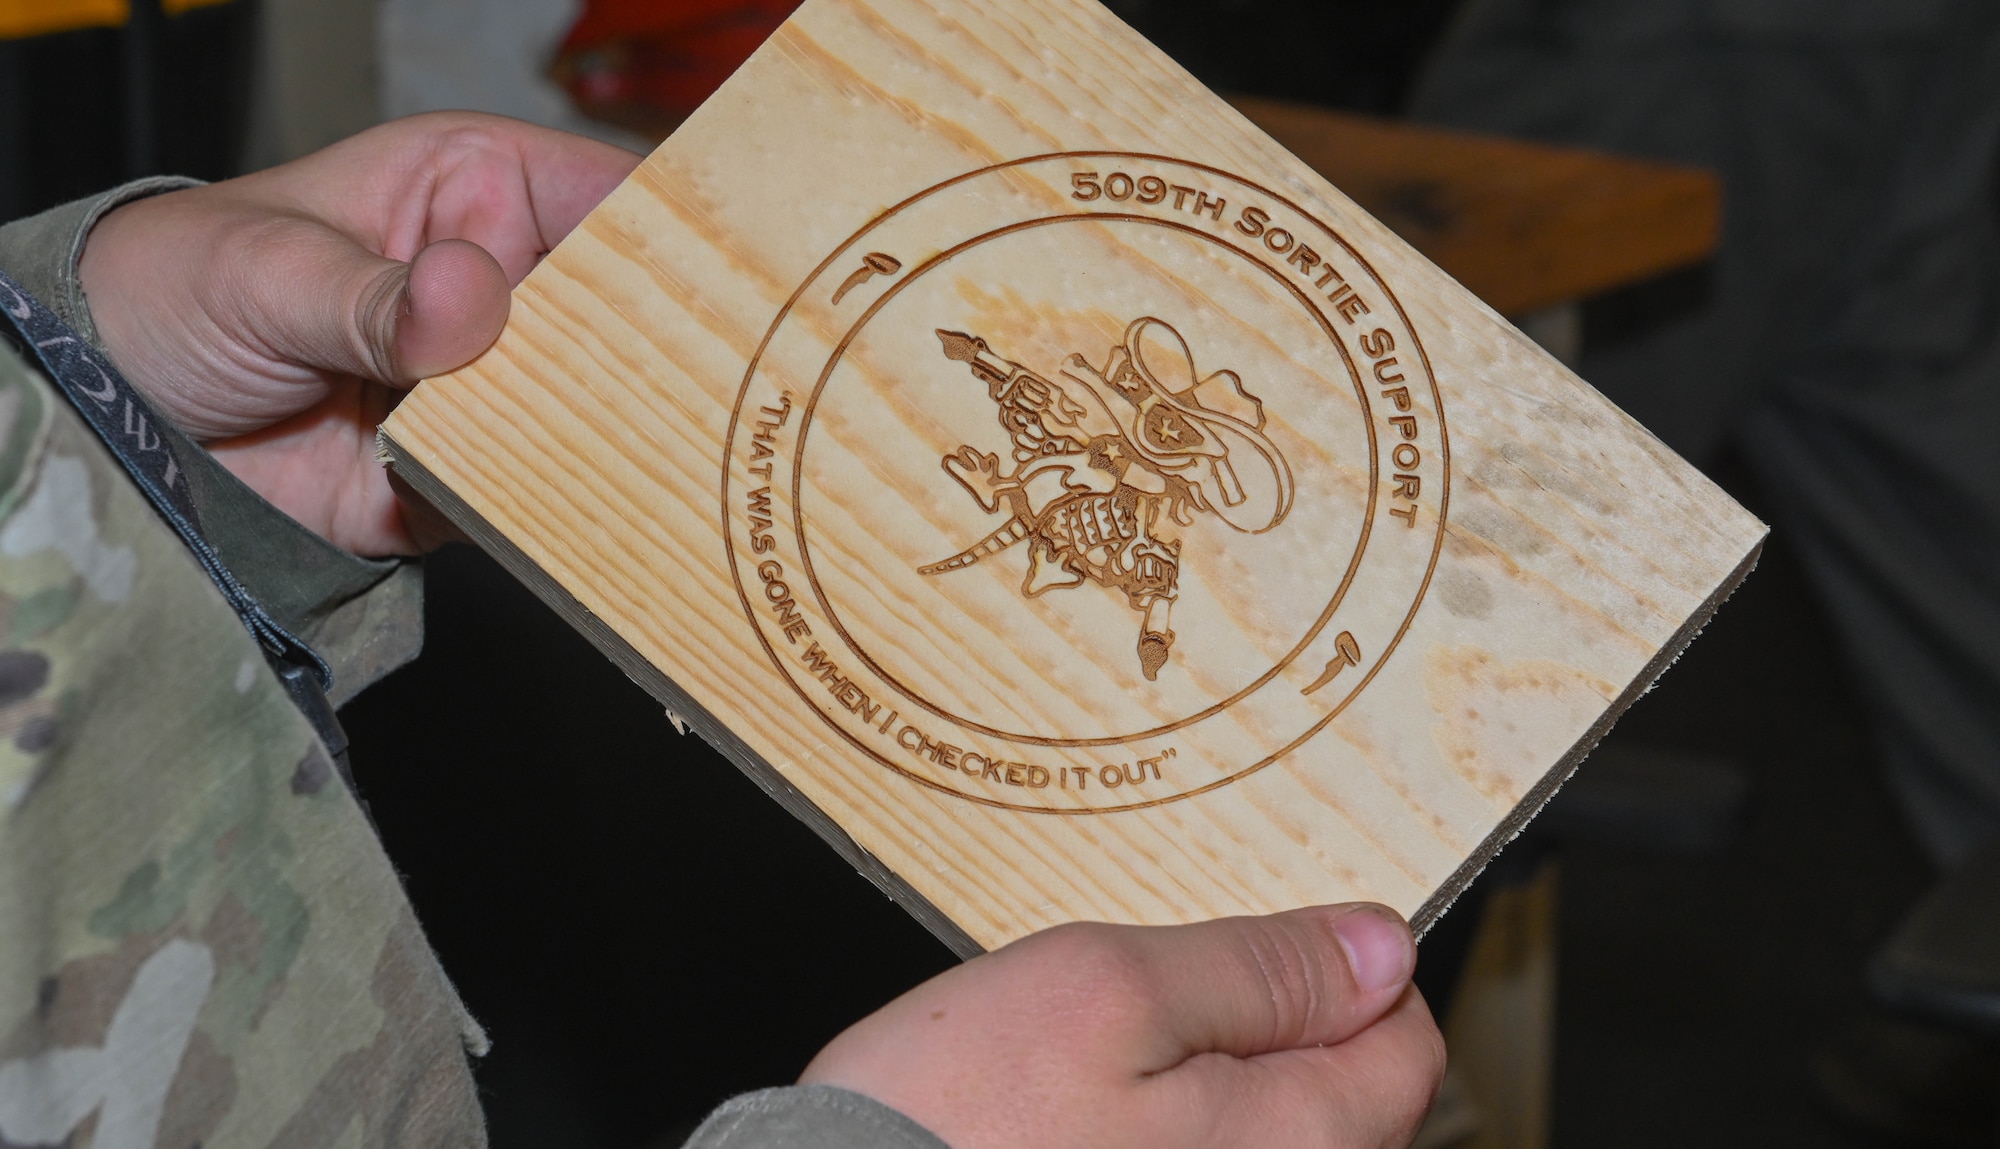 U.S. Air Force 509th Sortie Support CNC machine engraves the section's logo onto a piece of wood at Whiteman Air Force Base, Missouri, October 12, 2022. Support's mission is to provide serviceable equipment and tools needed for maintainers to perform their tasks. (U.S. Air Force photo by Airman 1st Class Hailey Farrell)